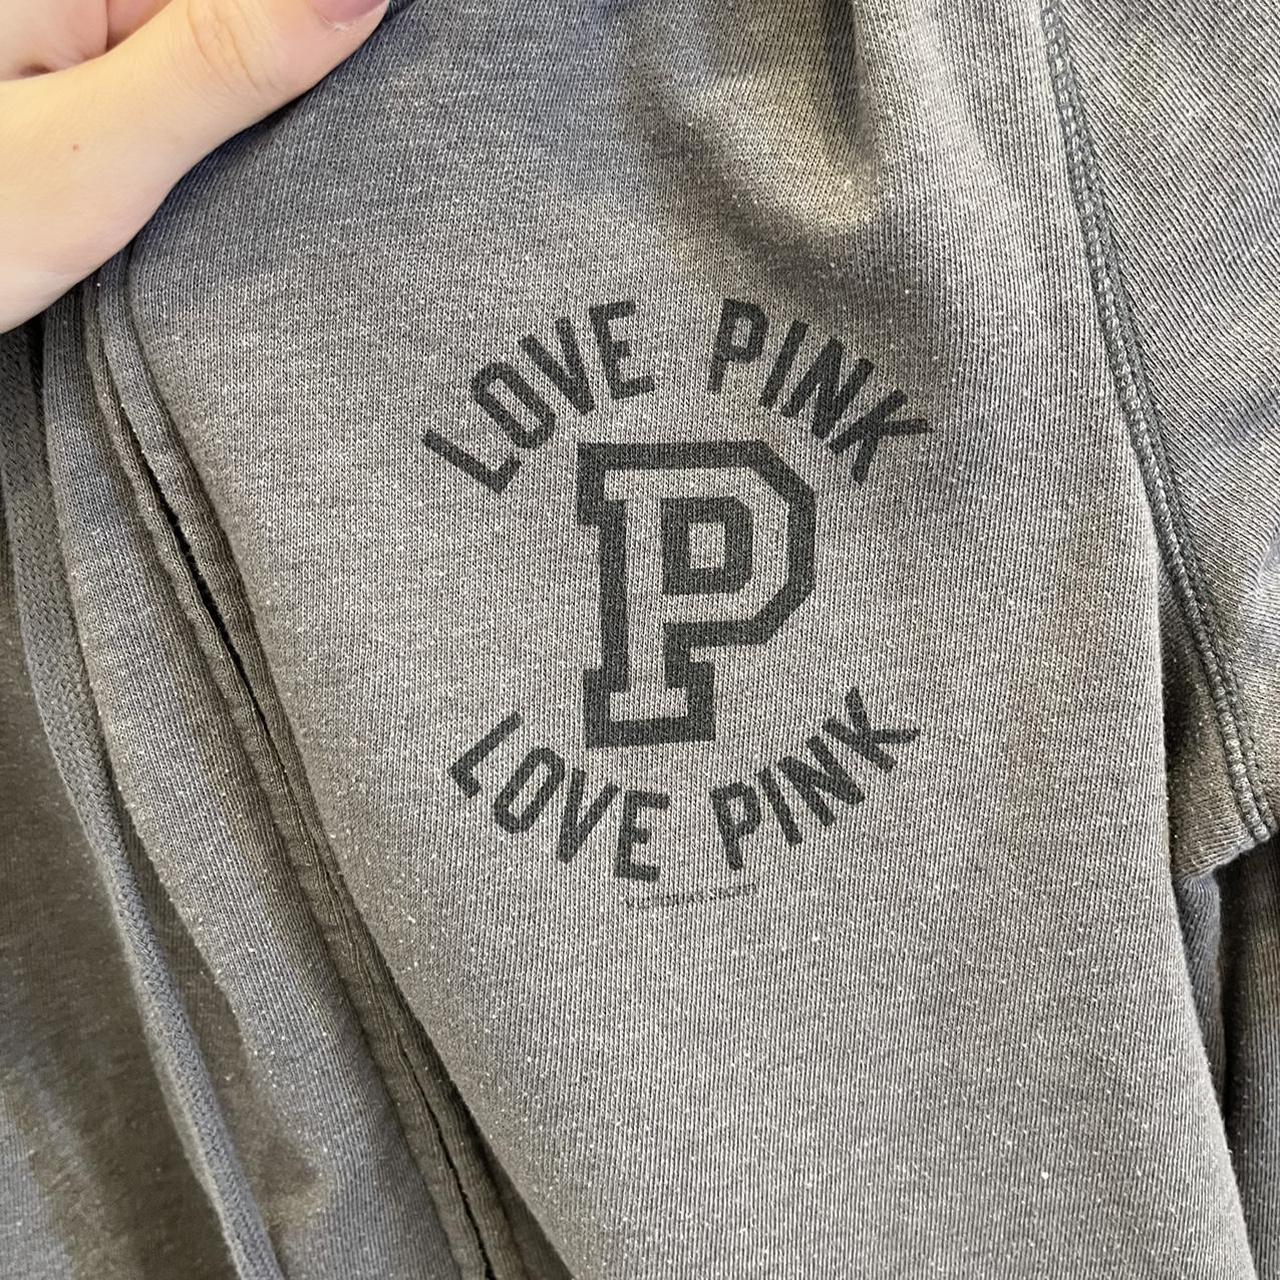 Product Image 2 - VS PINK gray zip up